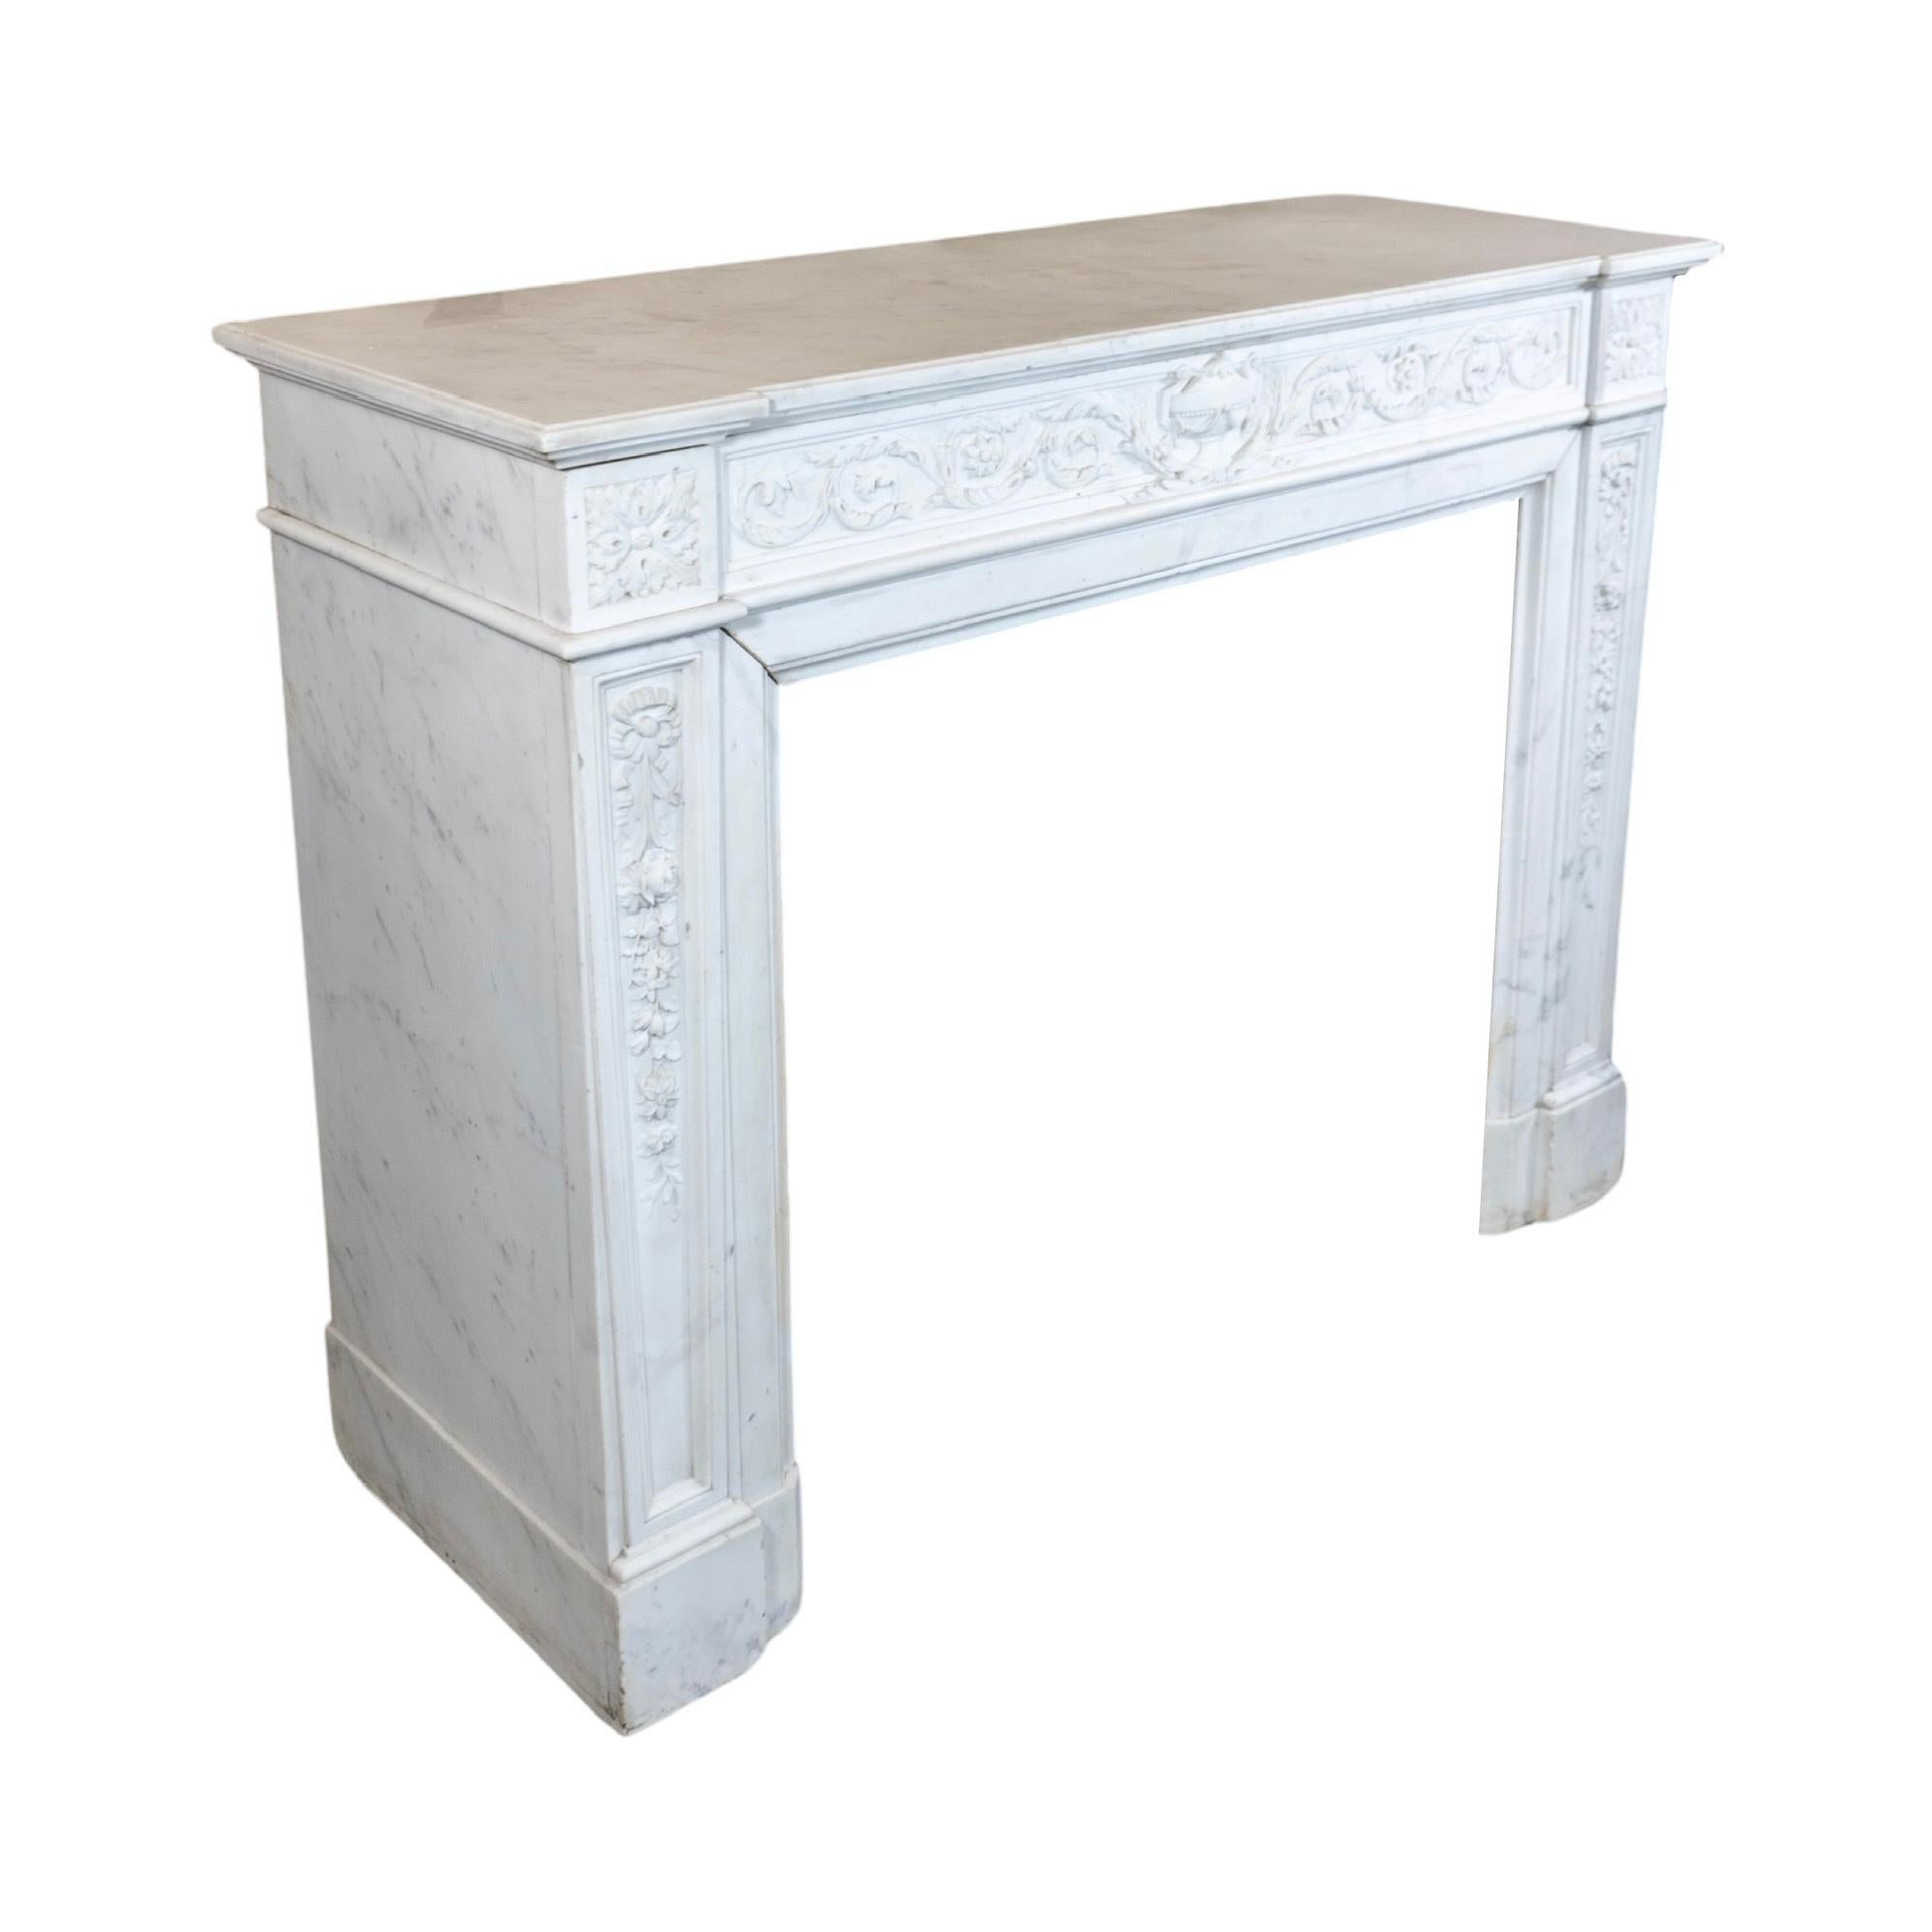 Mid-19th Century Carrara Marble Mantel from France In Good Condition For Sale In Dallas, TX